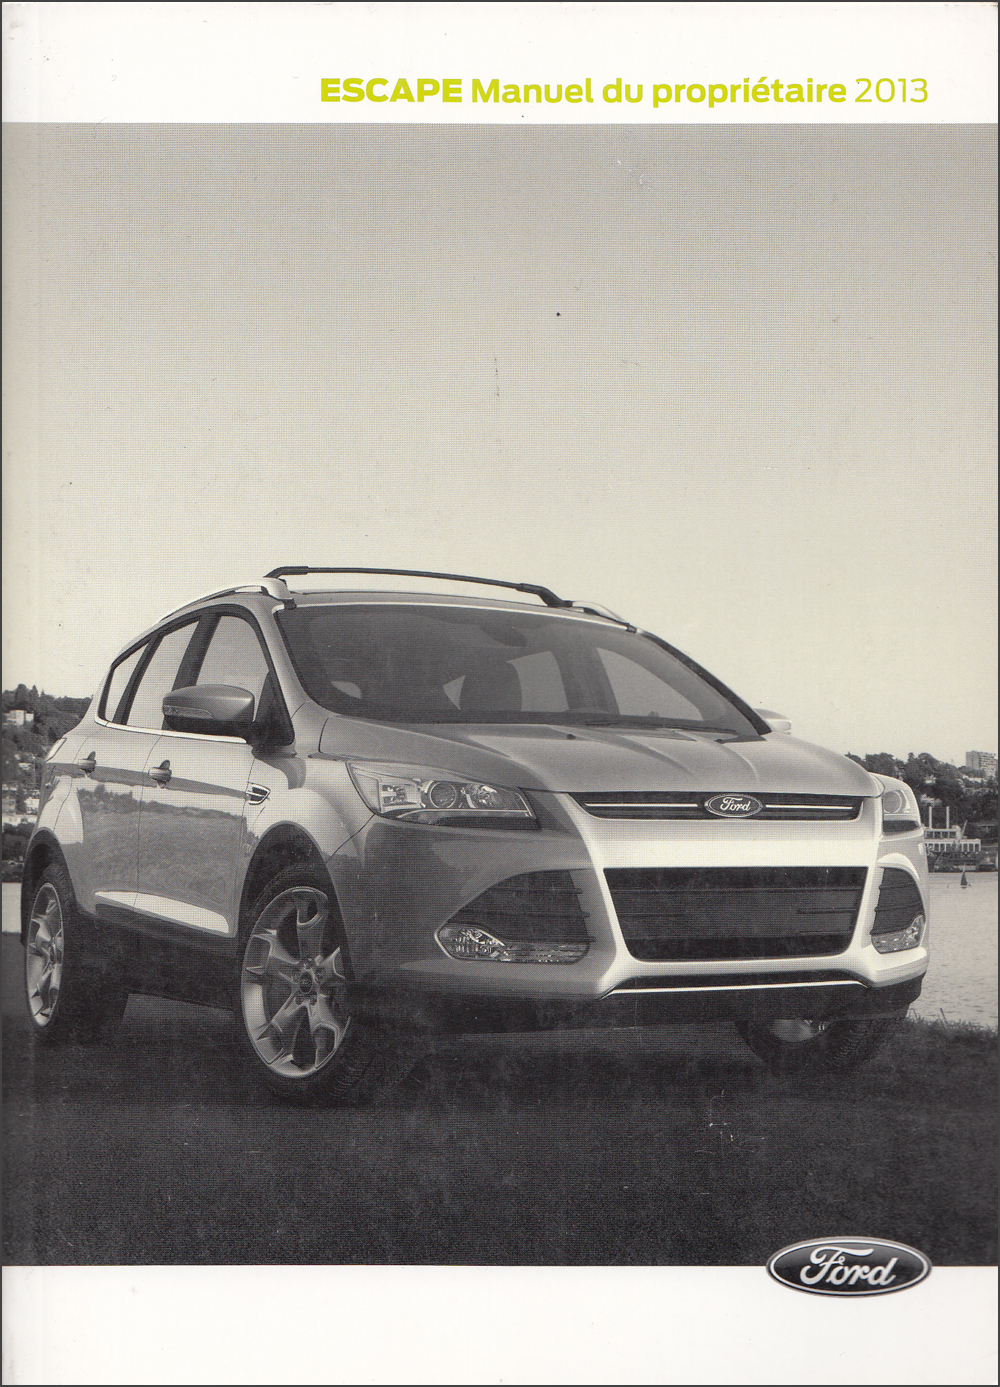 2013 Ford Escape Owner's Manual Original FRENCH Language Canadian